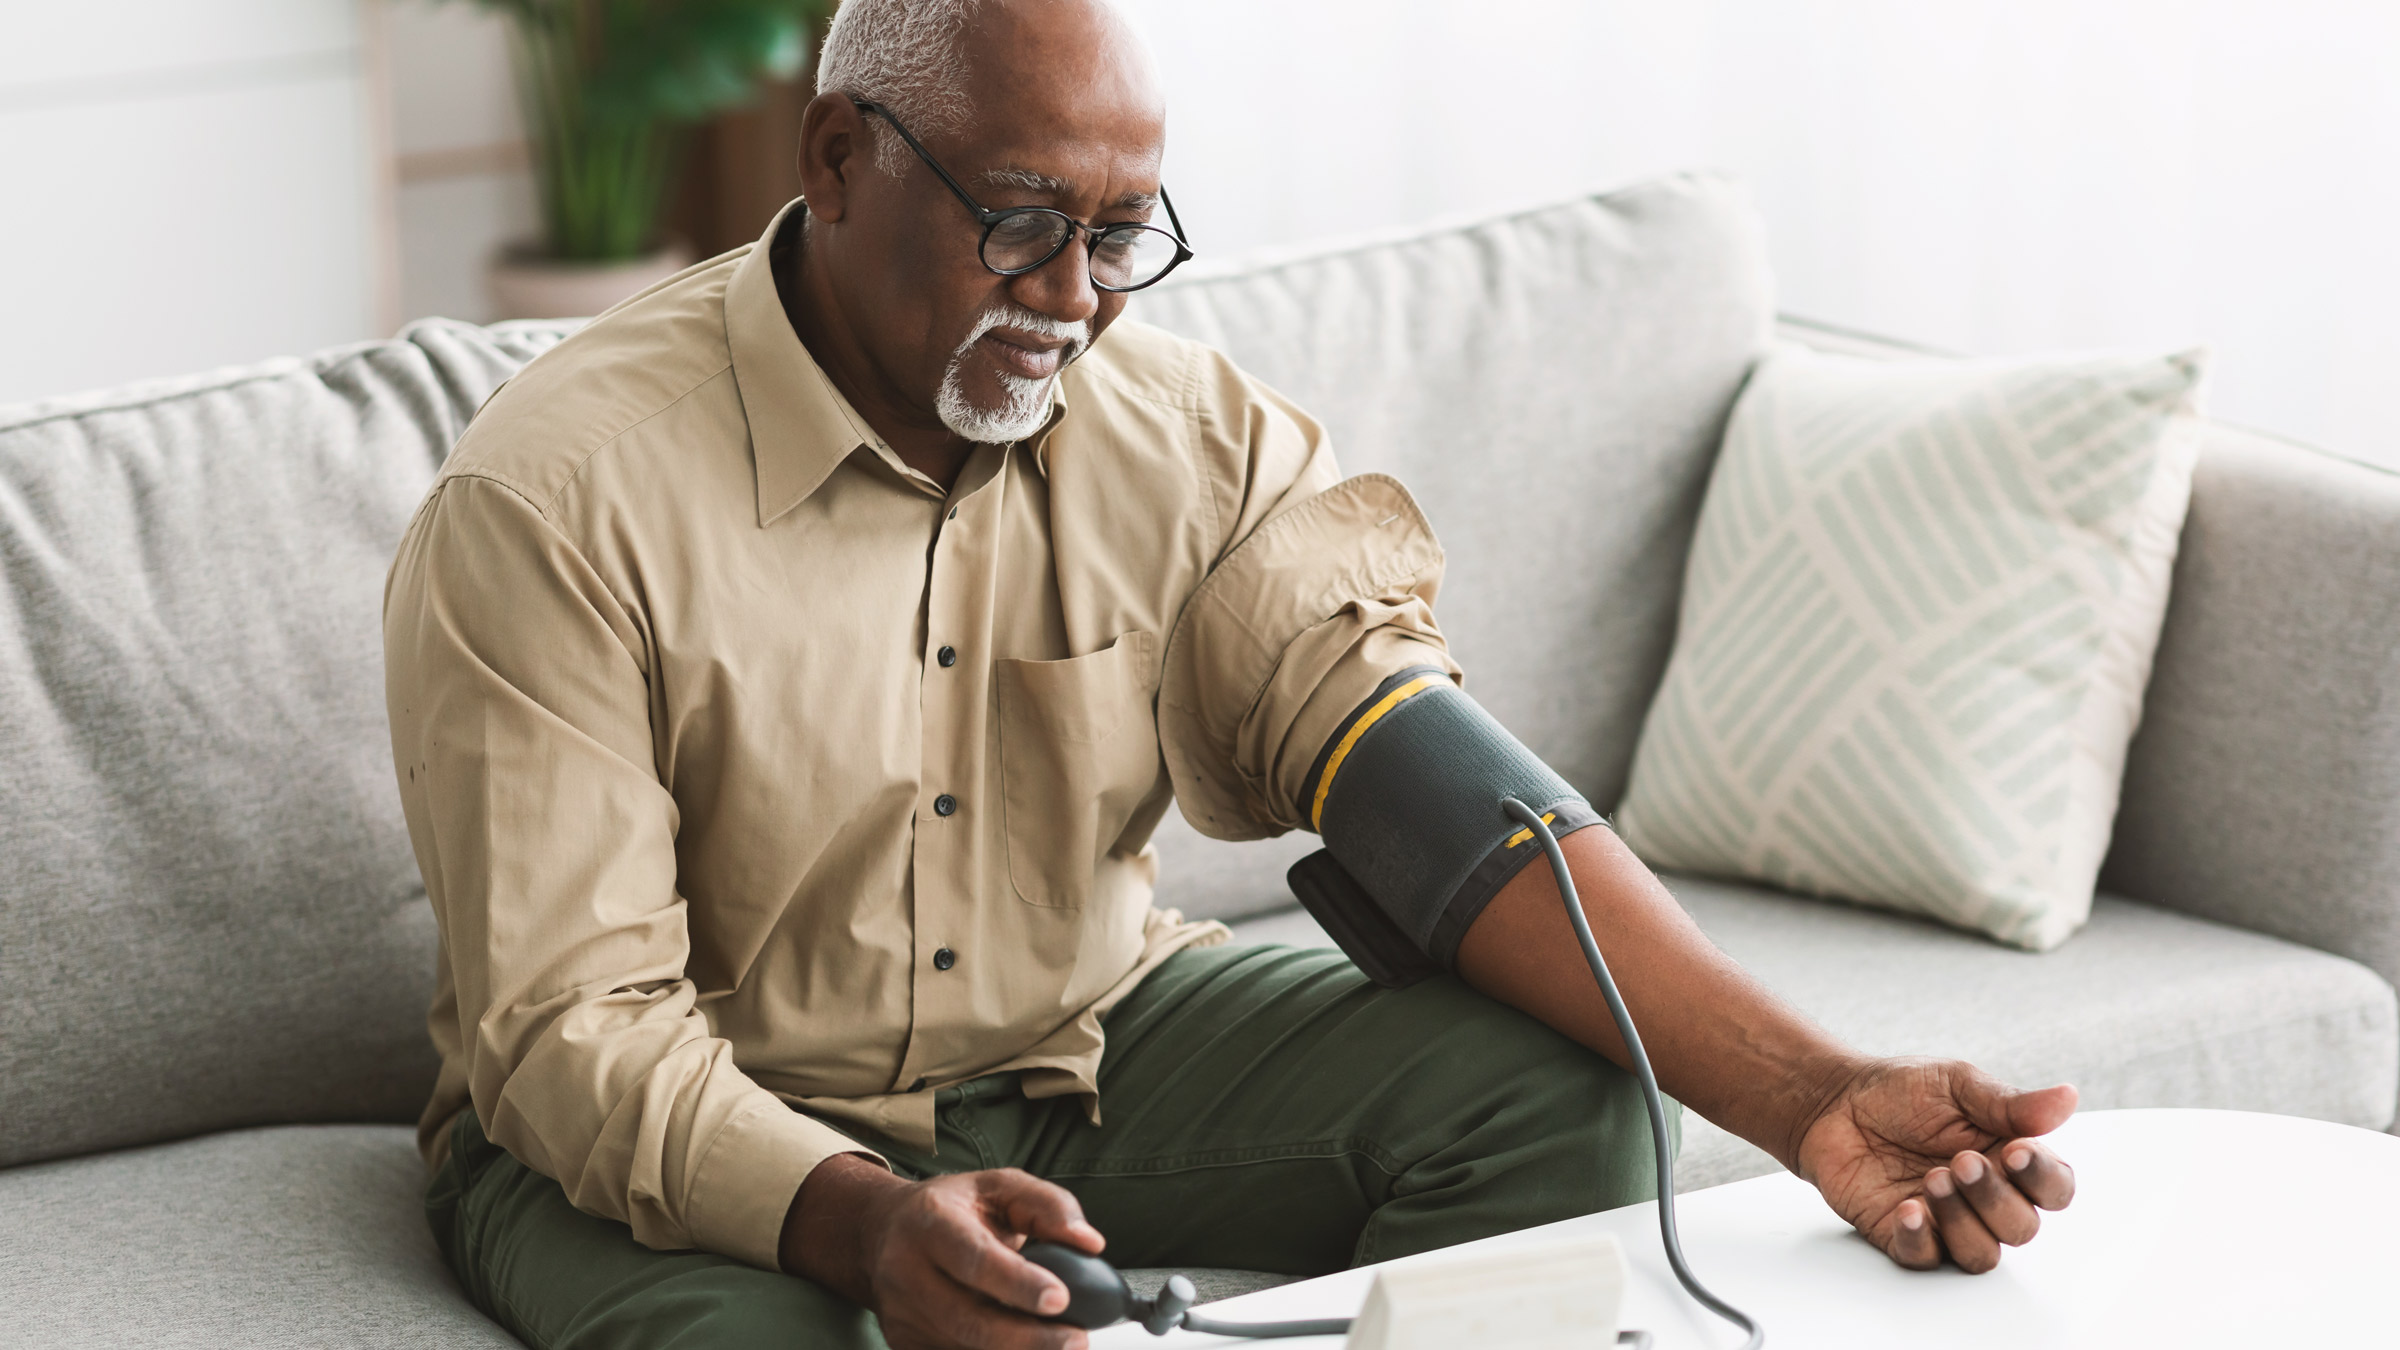 How Do I Know If My Blood Pressure Is Too High? - GoodRx